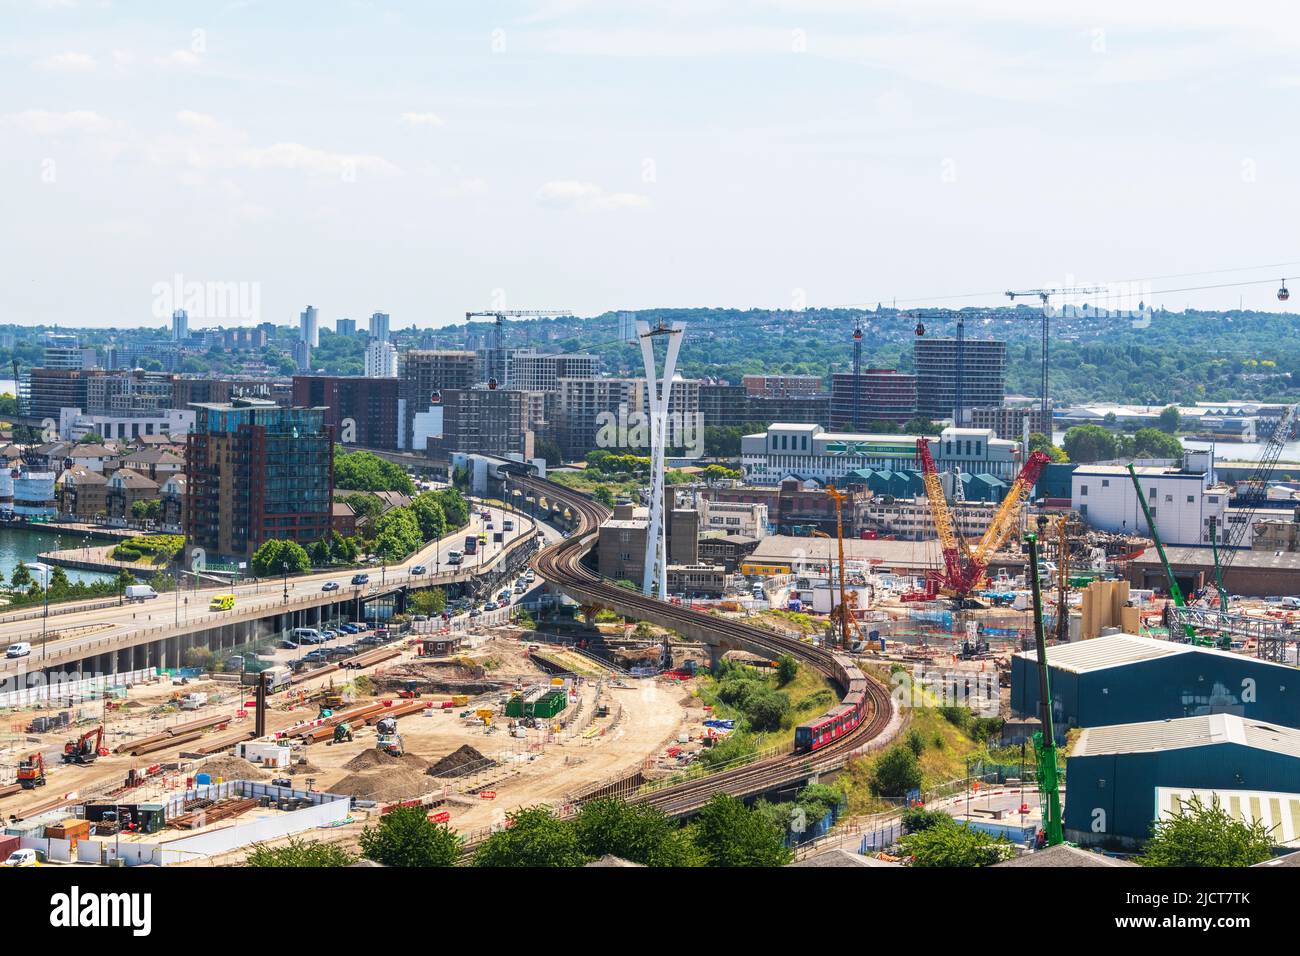 Aerial view of The DLR at West Silvertown and the surrounding Building sites, shot from Trinity Buoy Wharf, E14. Stock Photo